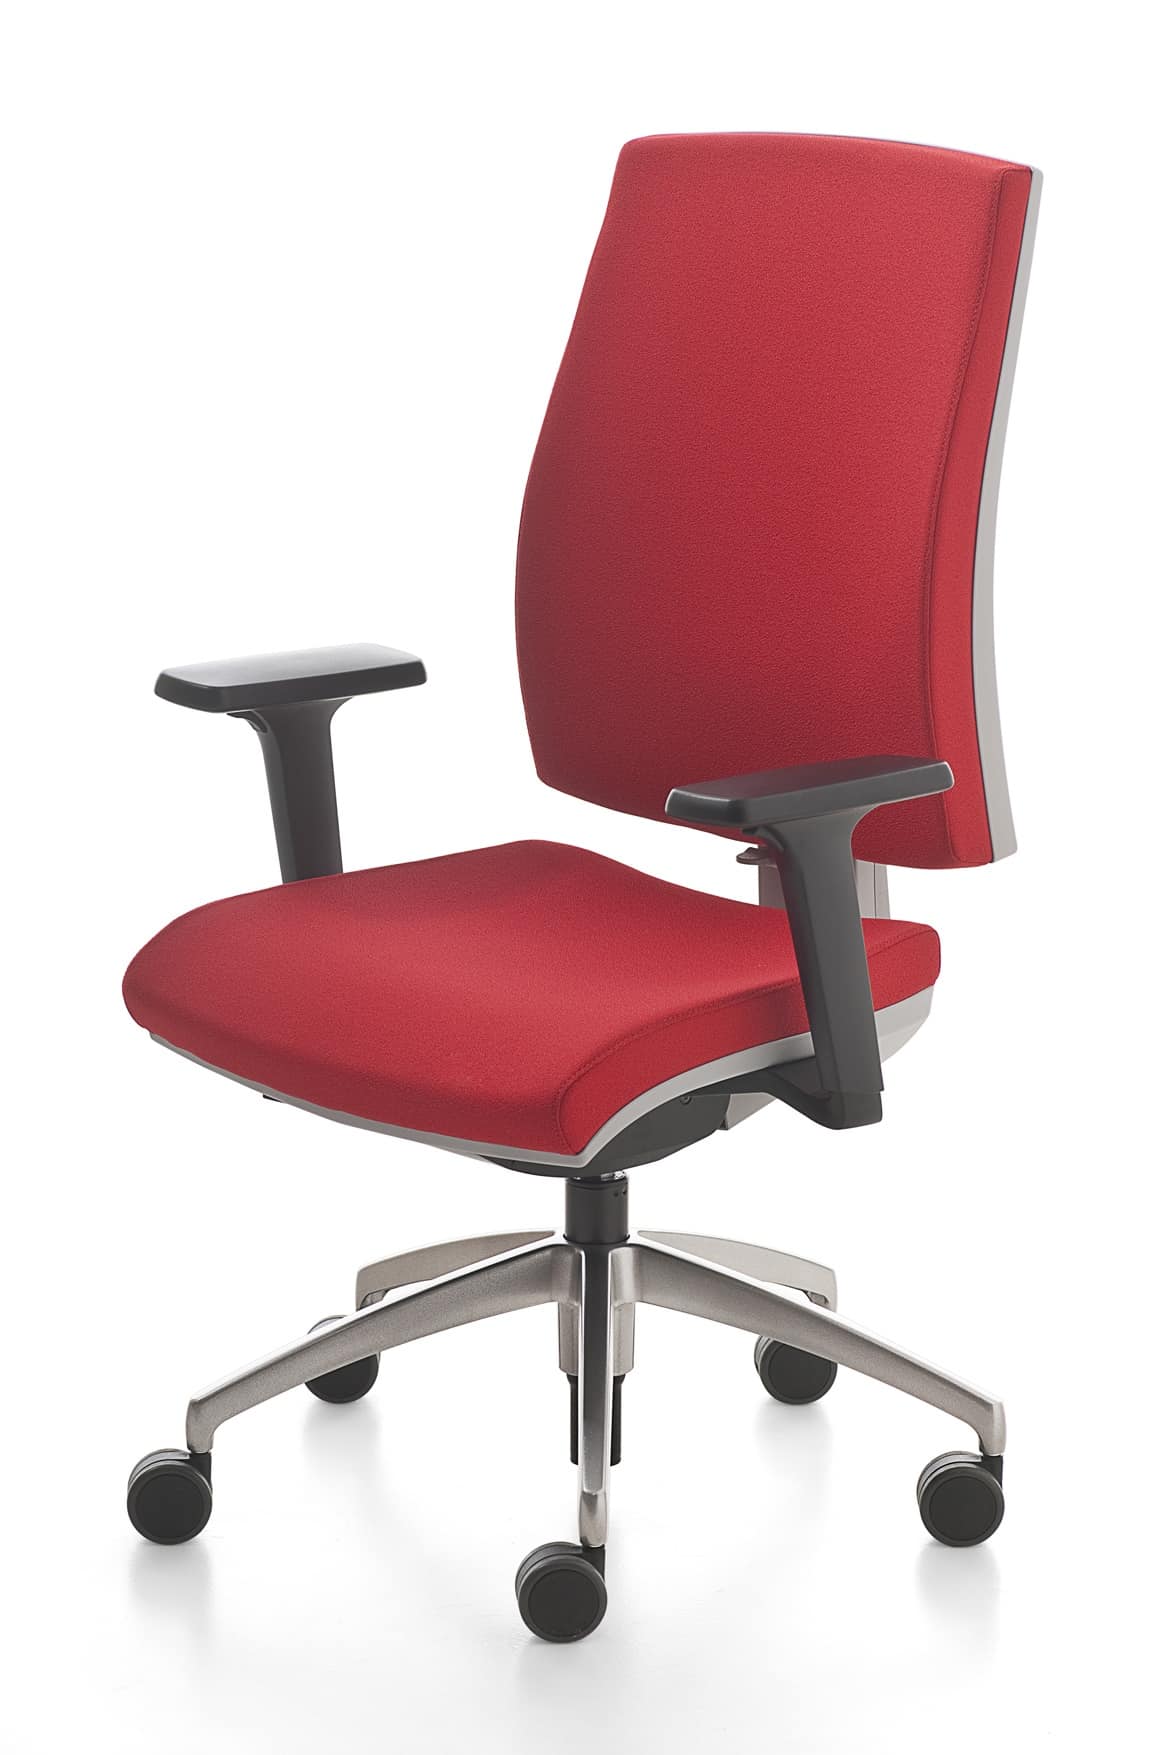 Kubika, Swivel office chair, with adjustable lumbar support